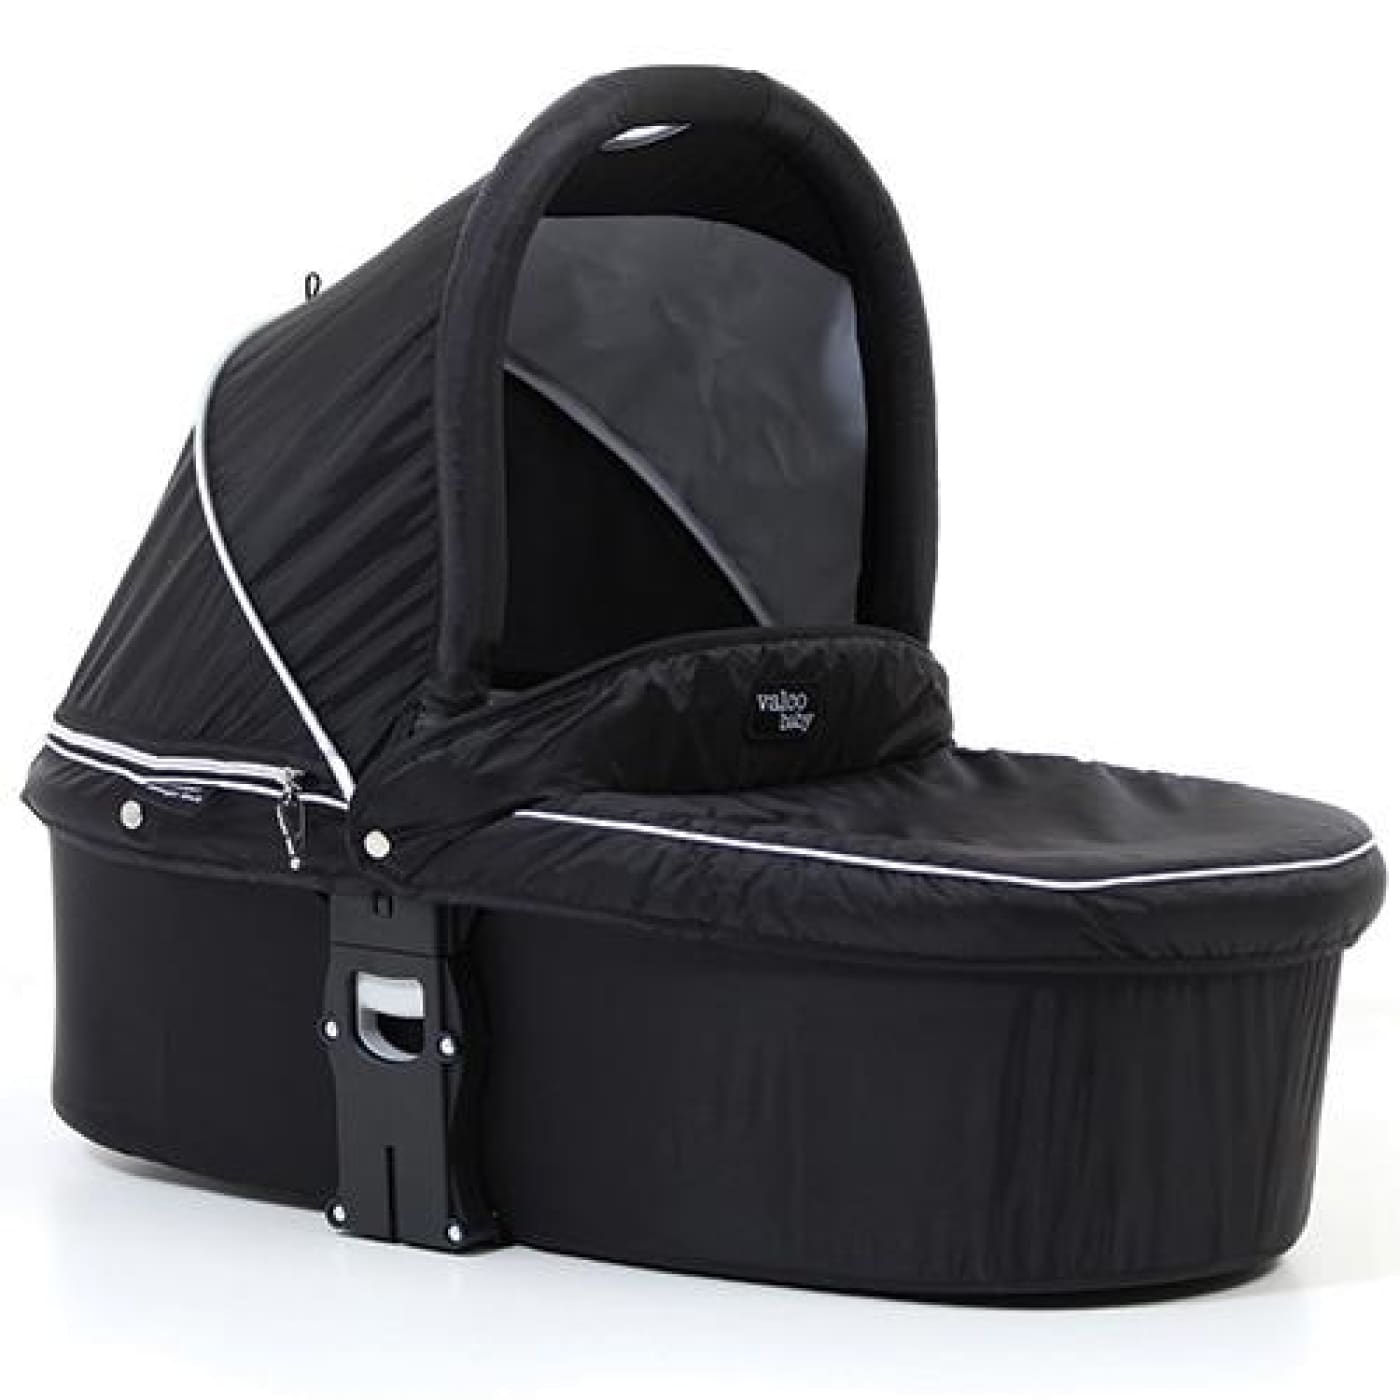 Valco Baby Q Bassinet - Midnight Black - PRAMS & STROLLERS - BASS/CARRY COTS/STANDS